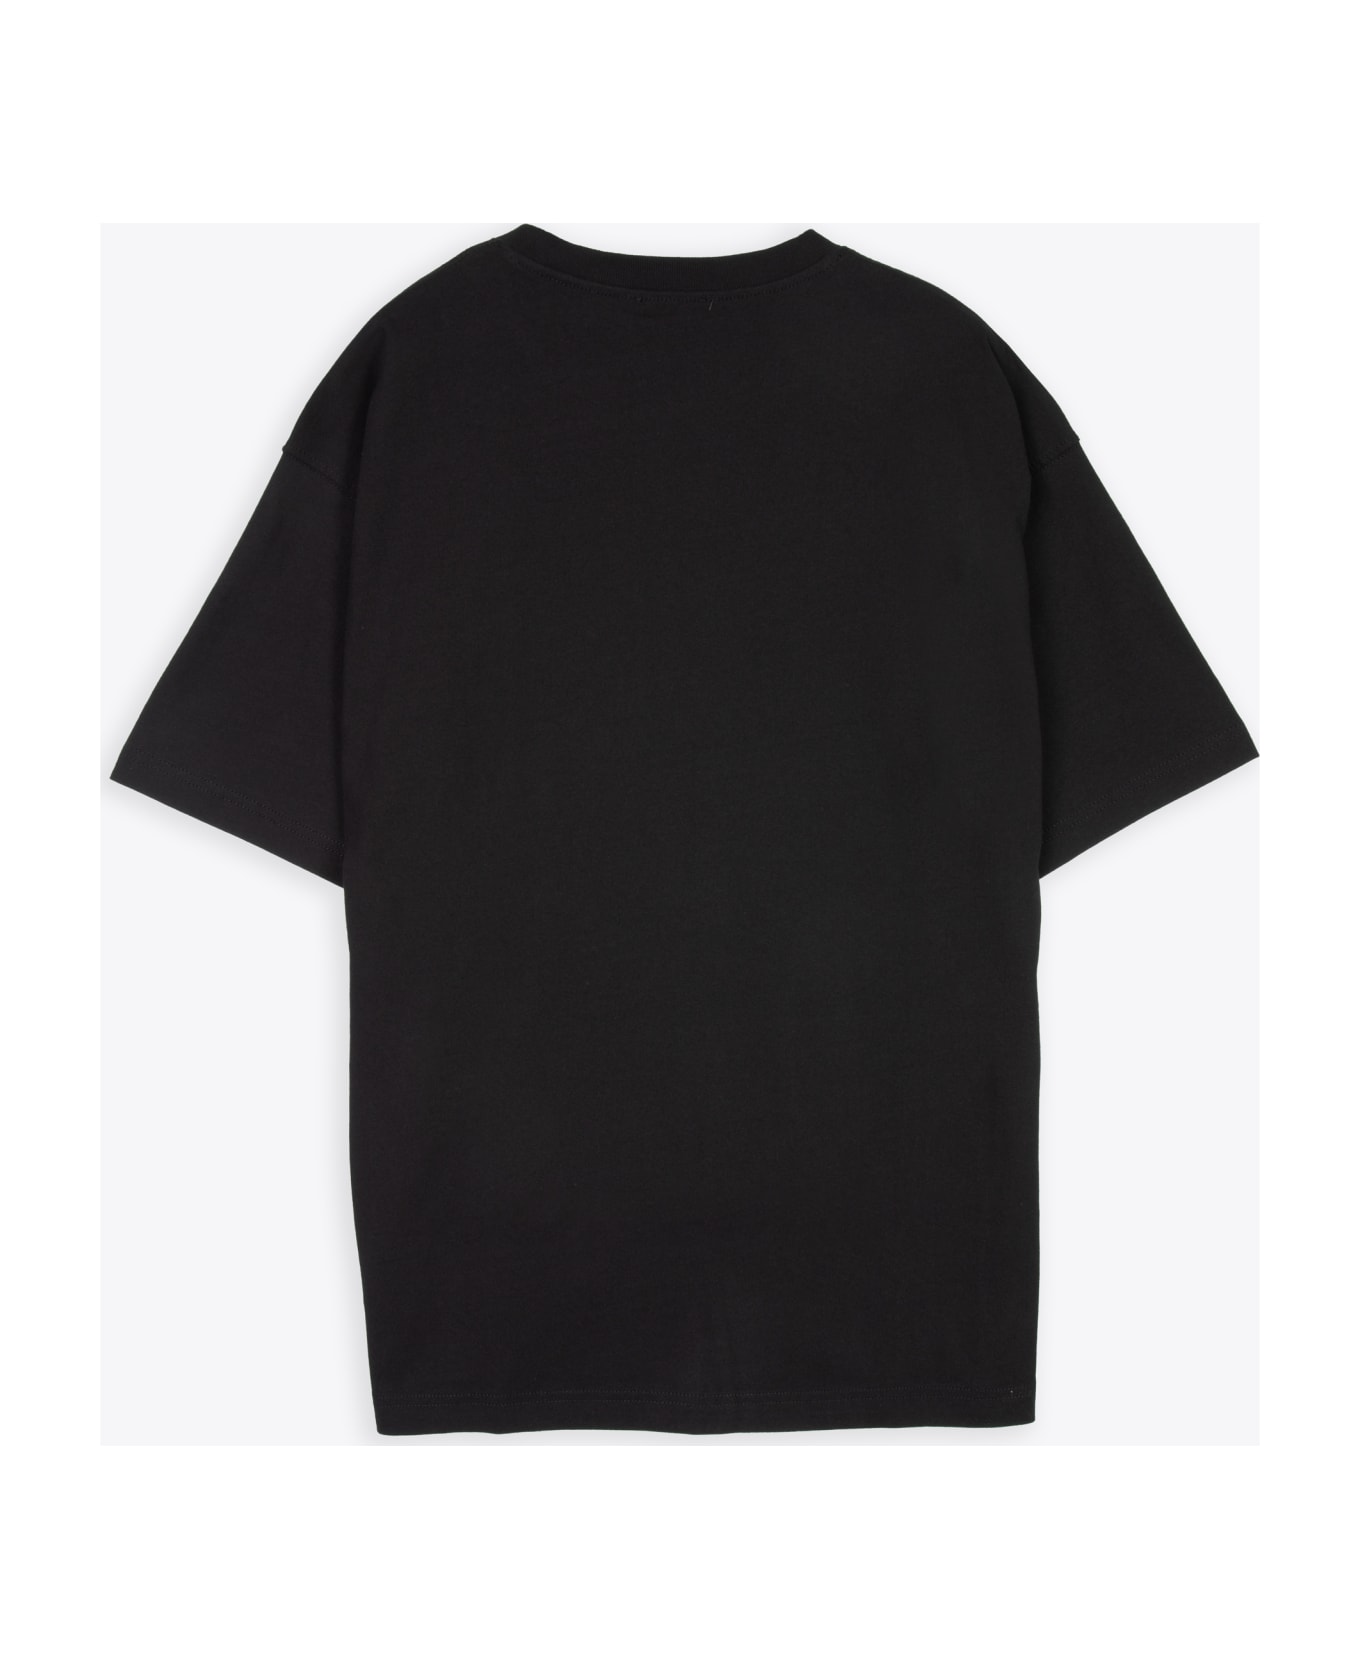 Diesel T-nlabel-l1 Black t-shirt with chest logo patch - T Danny Nlabel - Nero